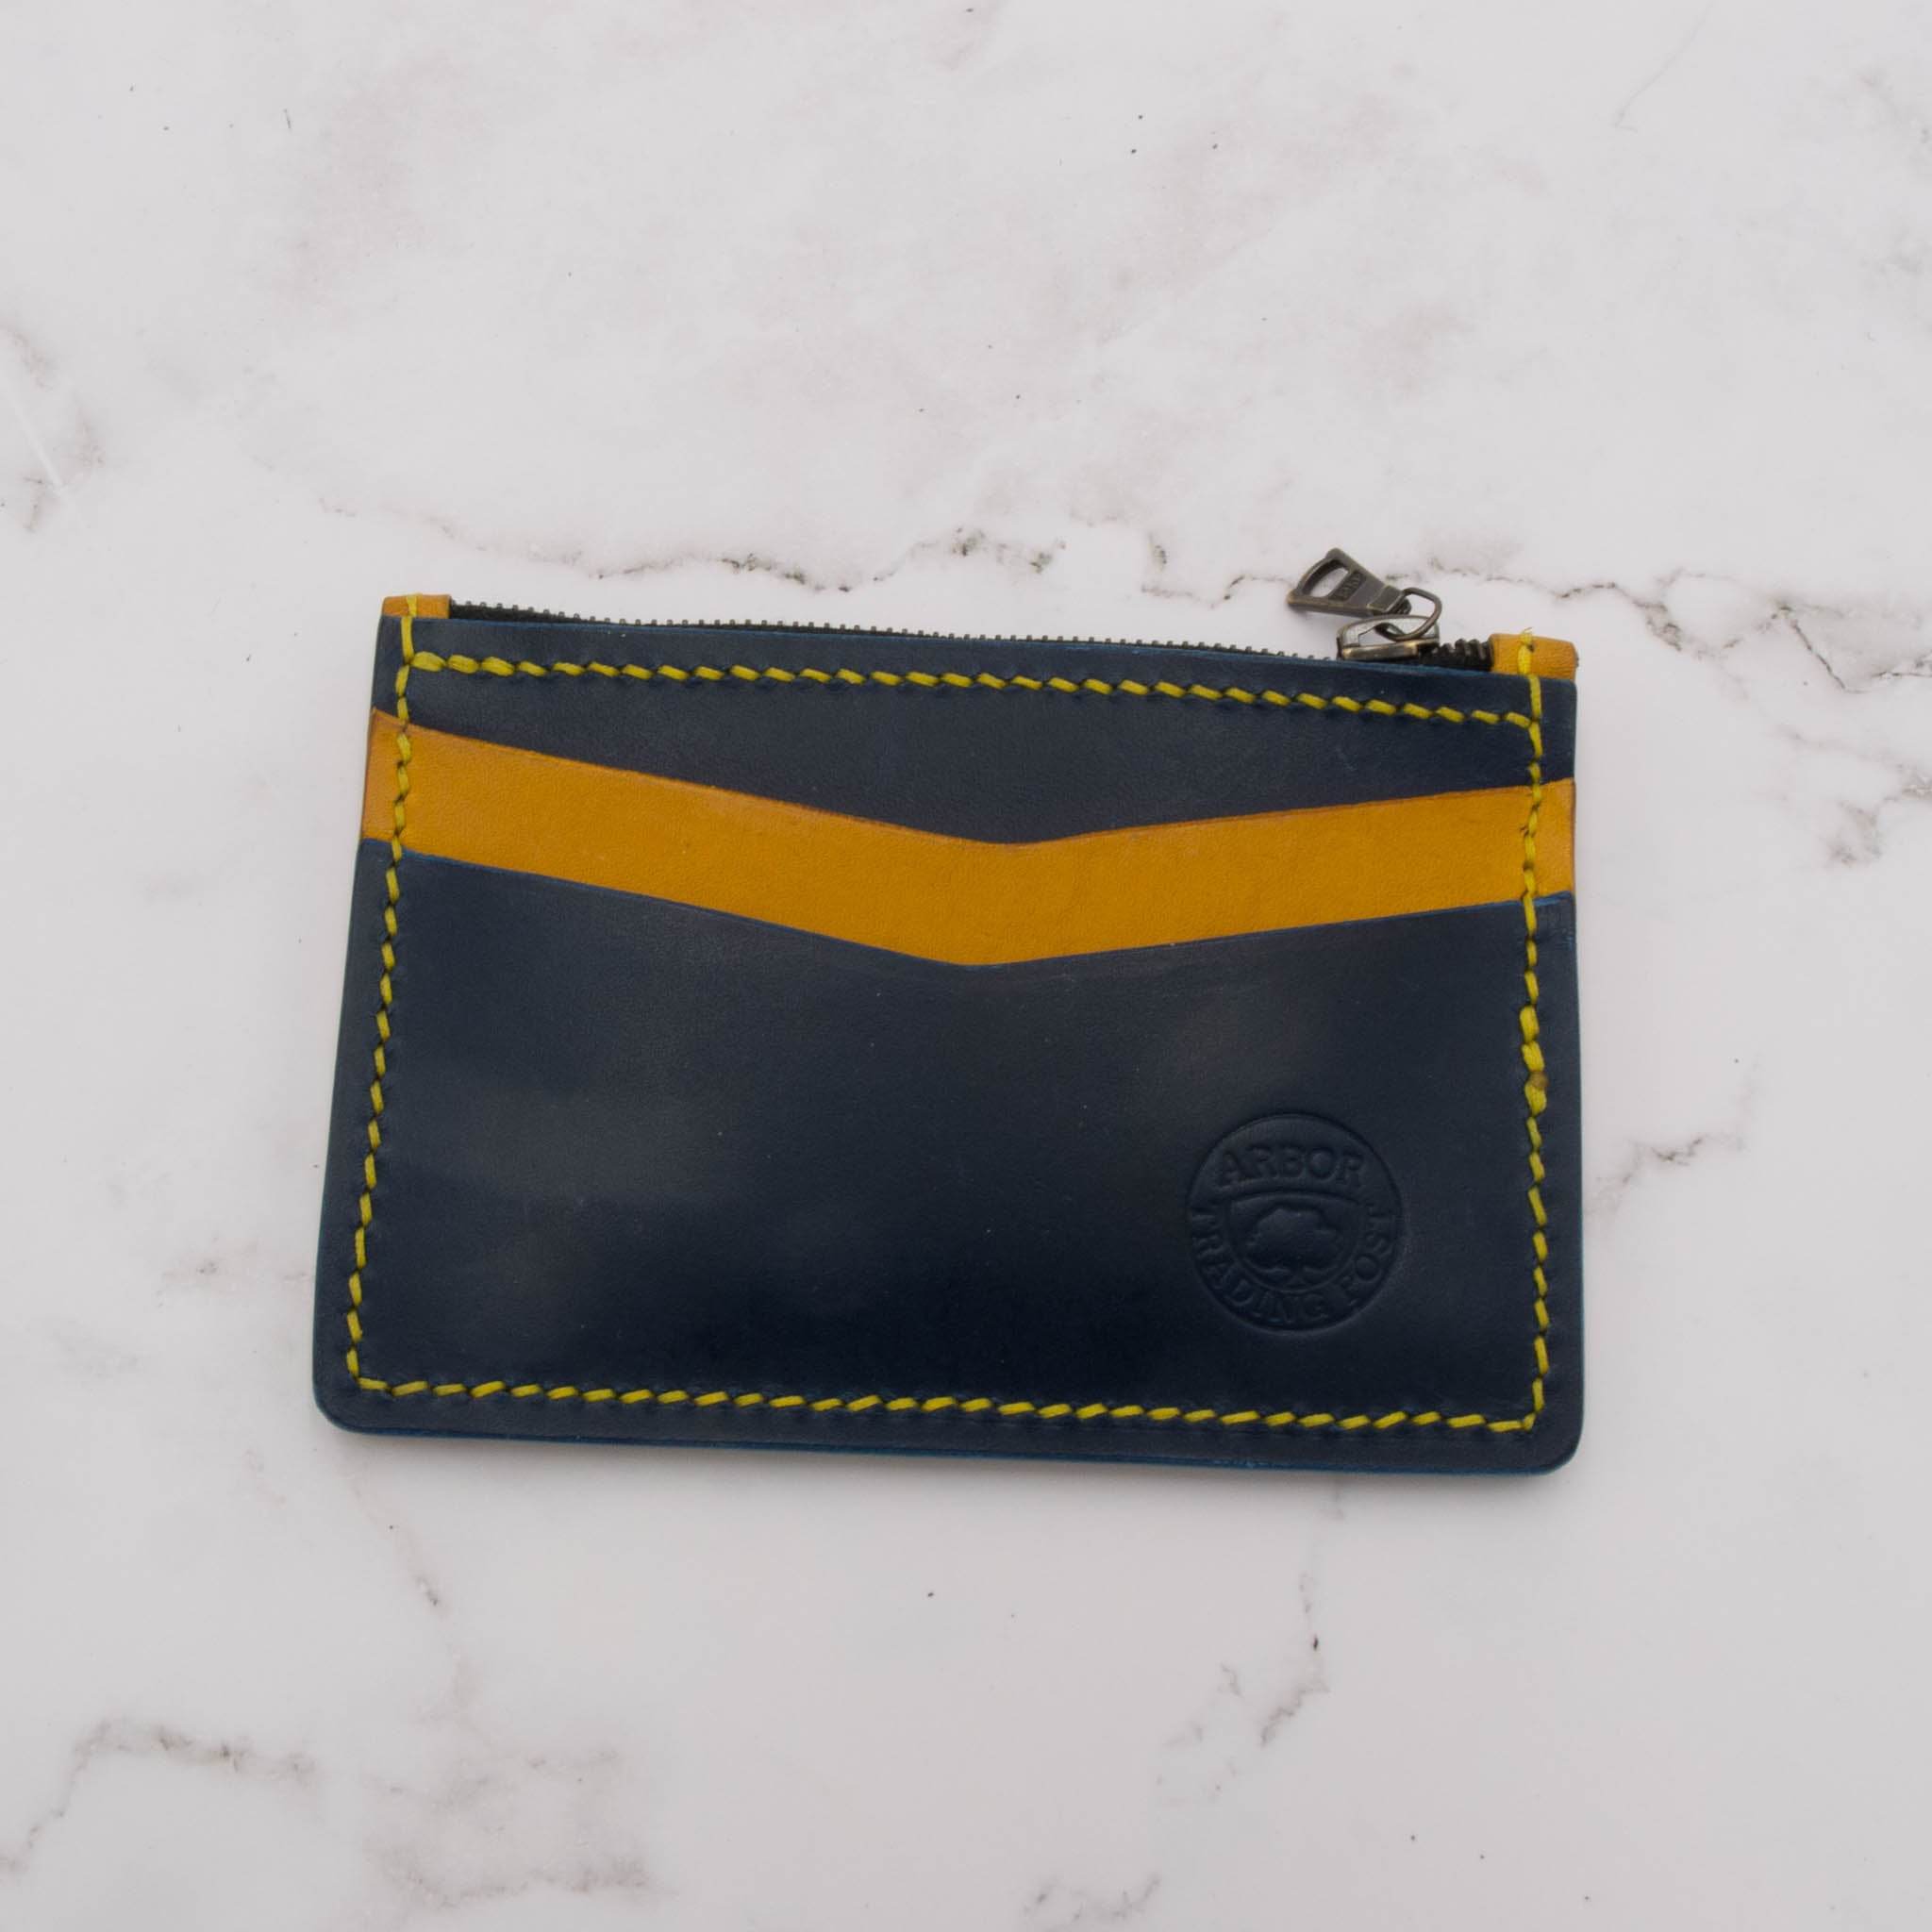 Handcrafted Leather Wallet with ID Window and Zipper - Two Tone Colors